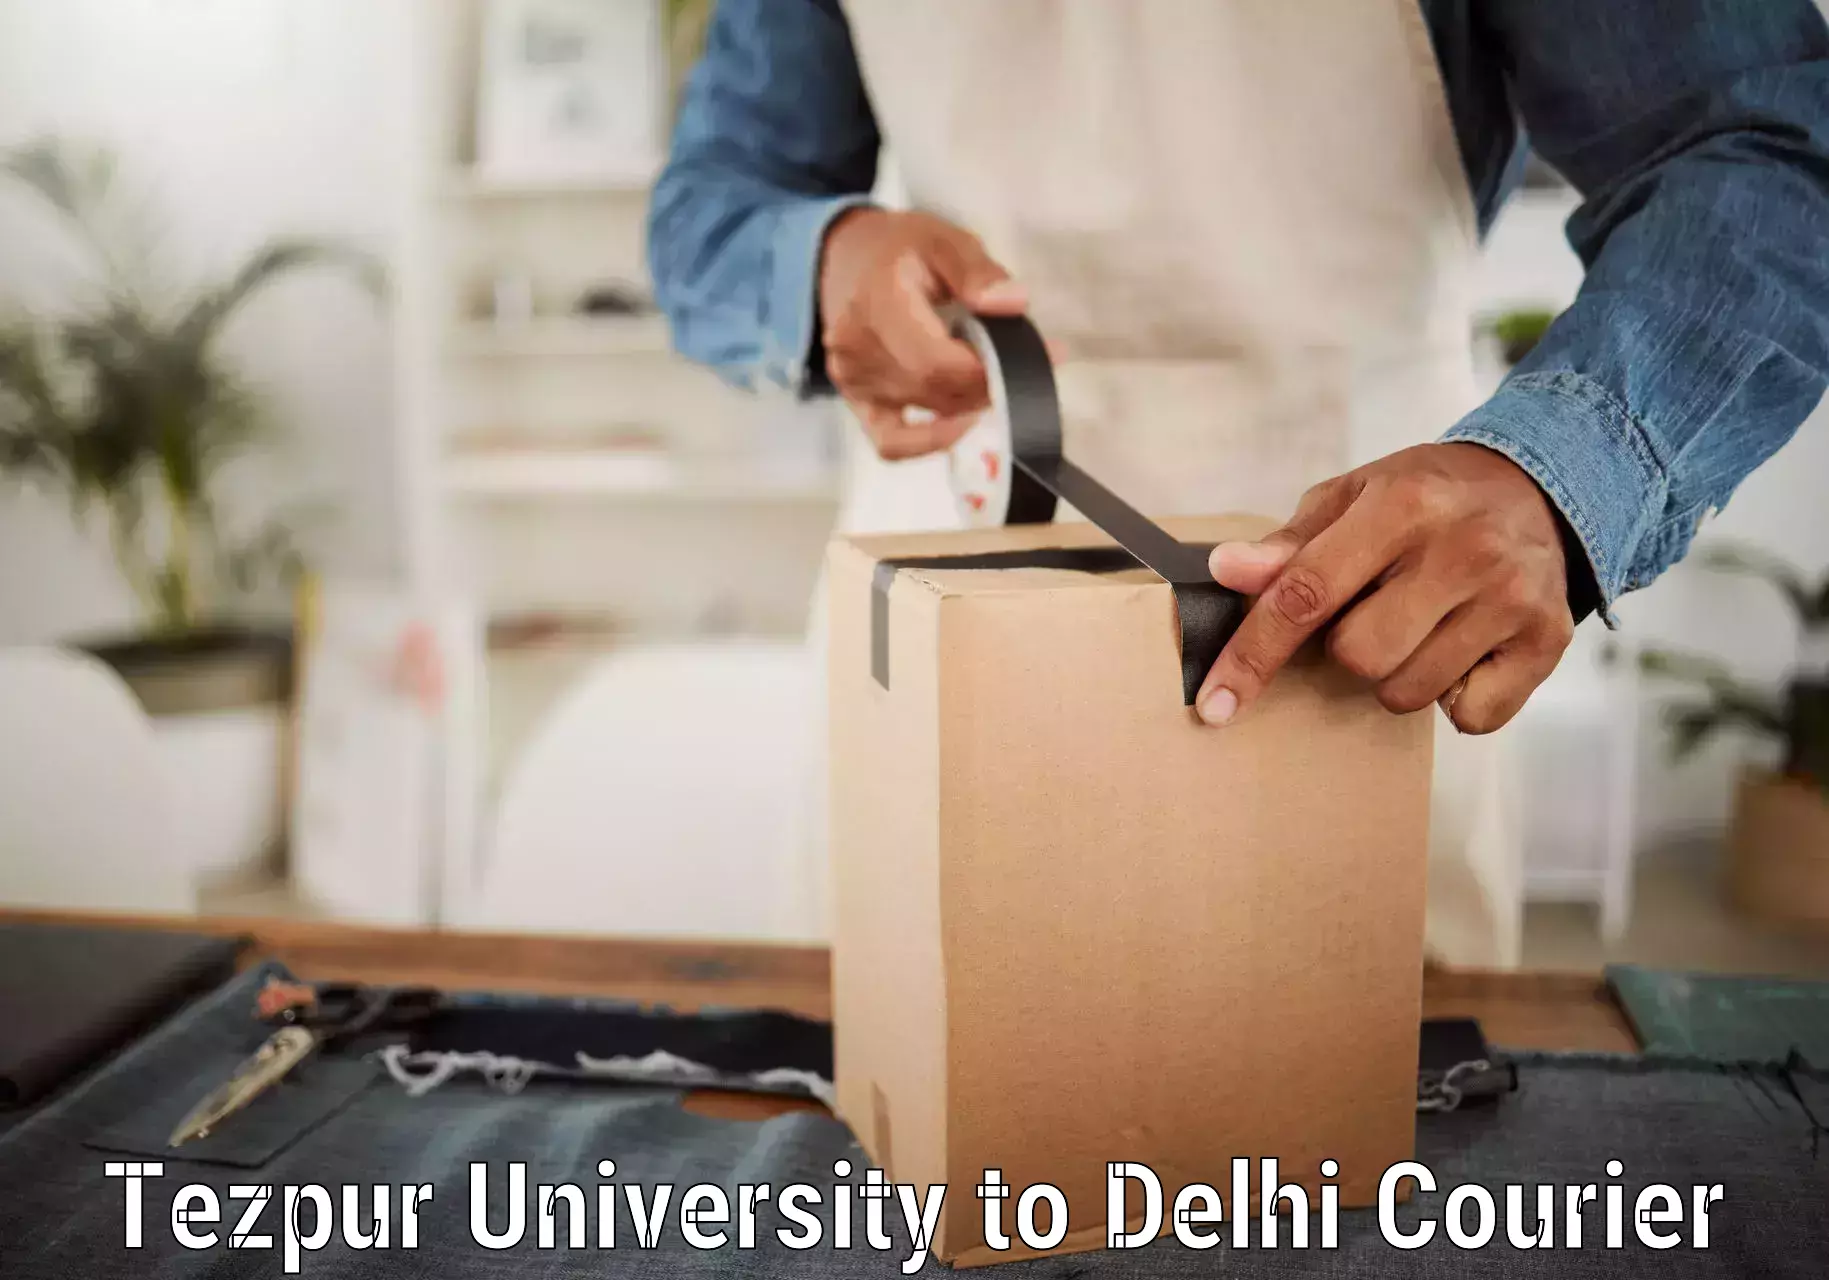 Automated parcel services Tezpur University to Indraprastha